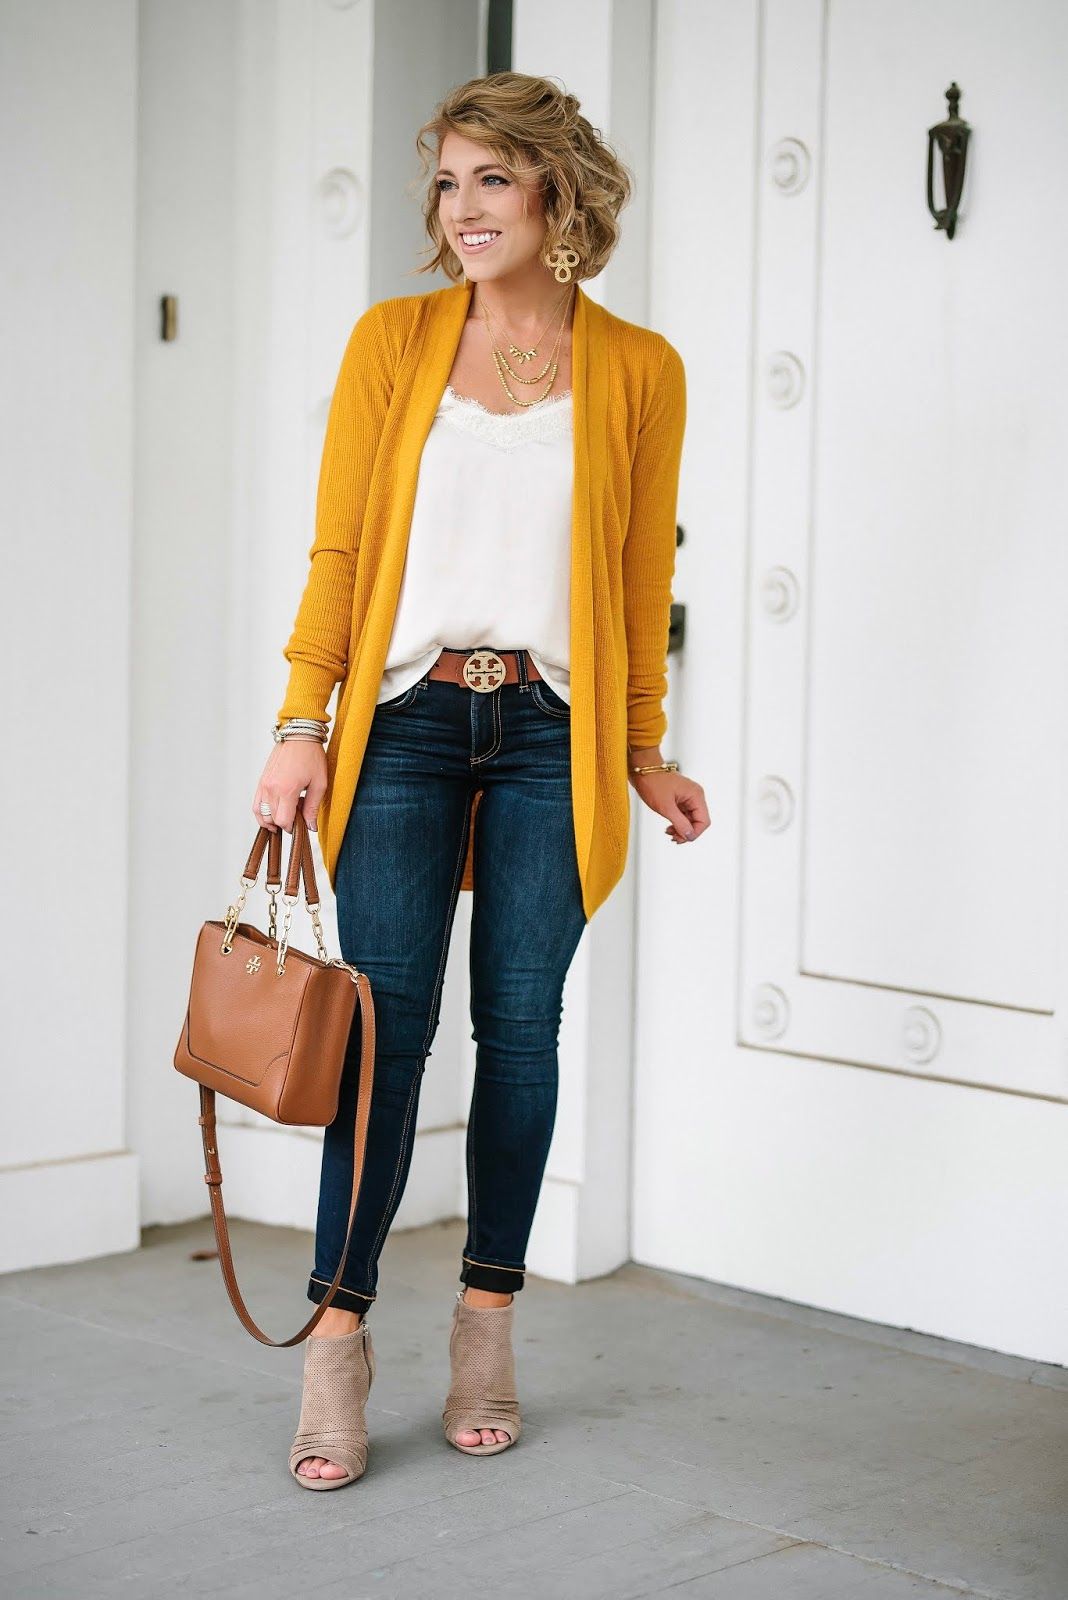 Top 13 Mustard Yellow Cardigan Outfit Ideas for Women